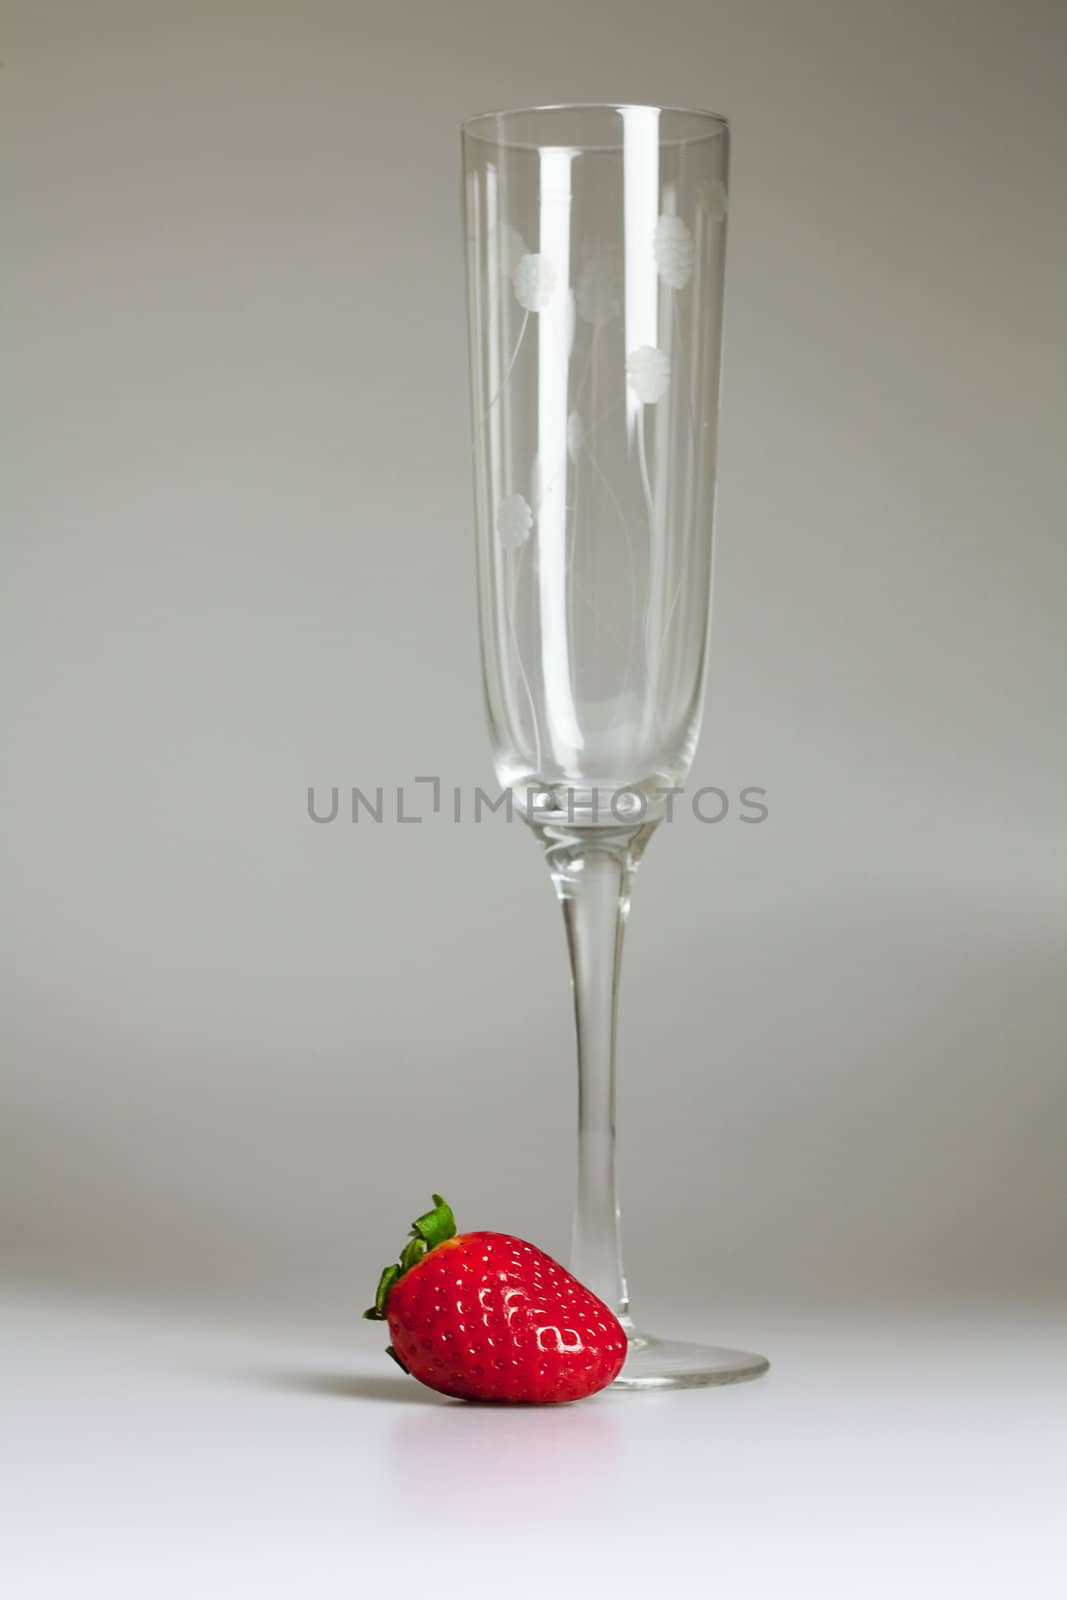  a glass and juicy strawberries by jannyjus